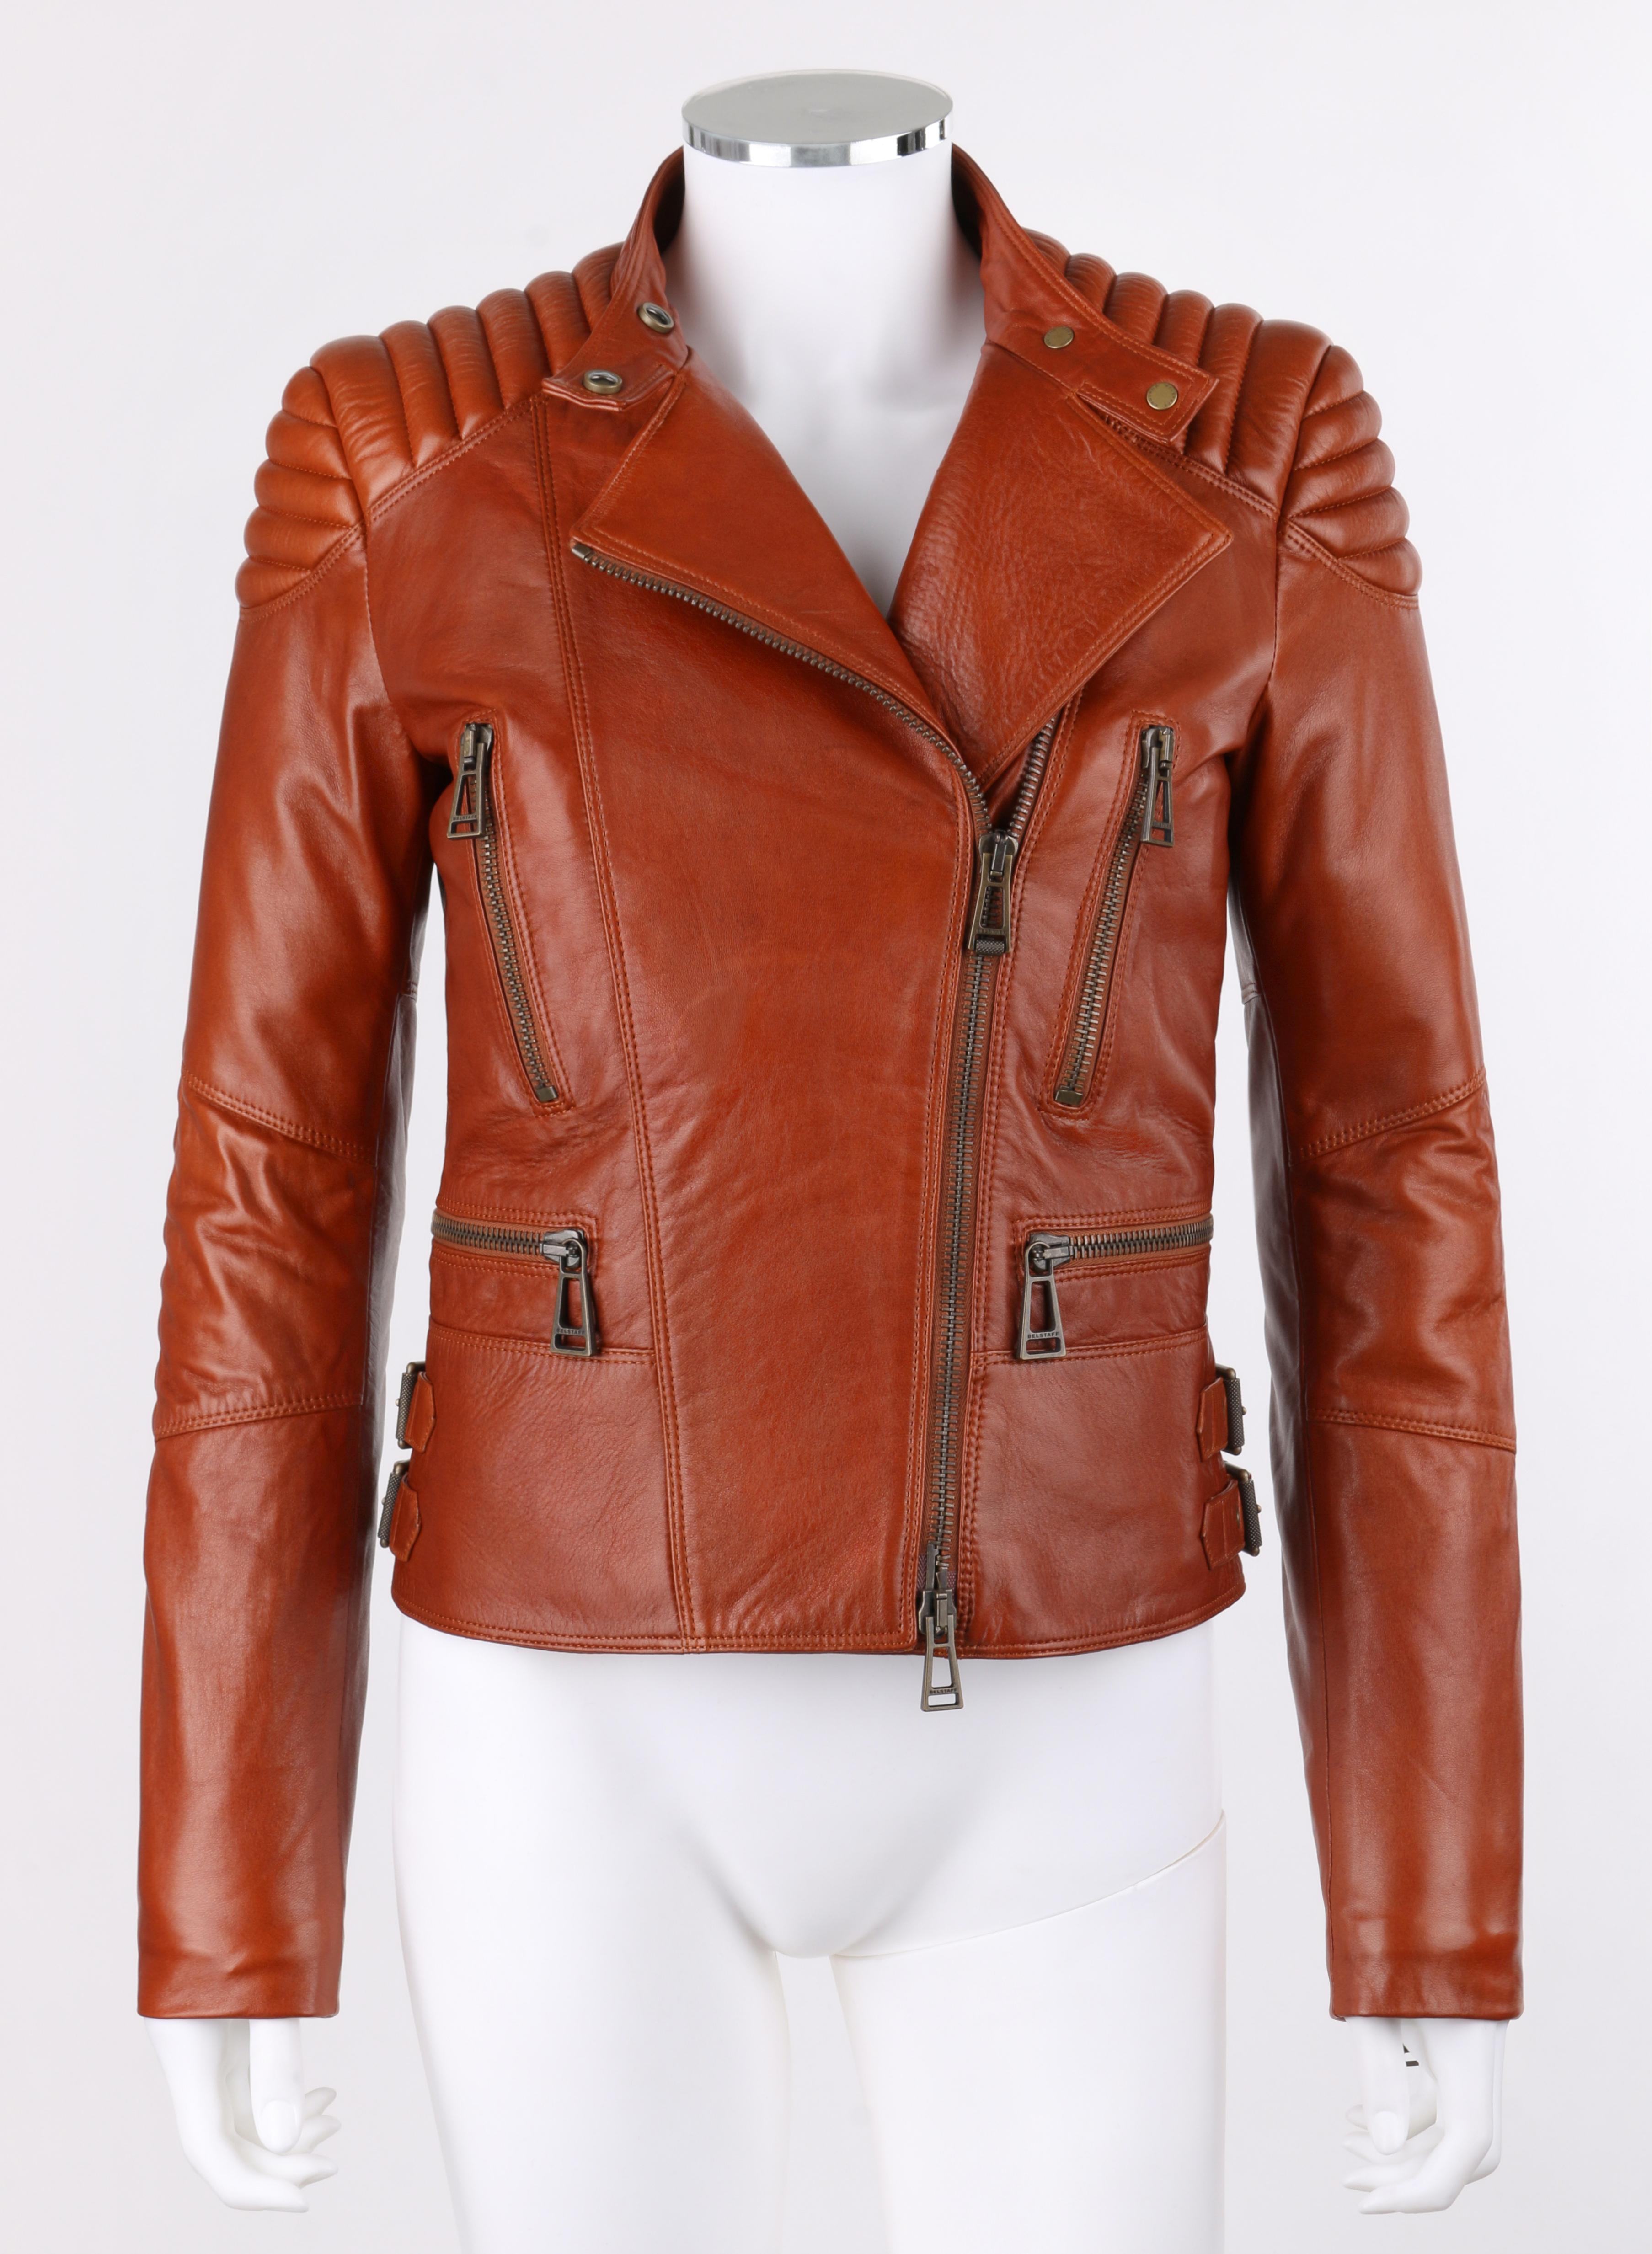 BELSTAFF c.2013 “Sydney” Molasses Brown Asymmetrical Quilted Napa Leather Motorcycle Biker Jacket 
 
Estimated Retail: $1,295
 
Brand / Manufacturer: Belstaff
Manufacturer Style Name: Sydney Moto
Style: Moto Jacket
Color(s): Brown
Lined: Yes     